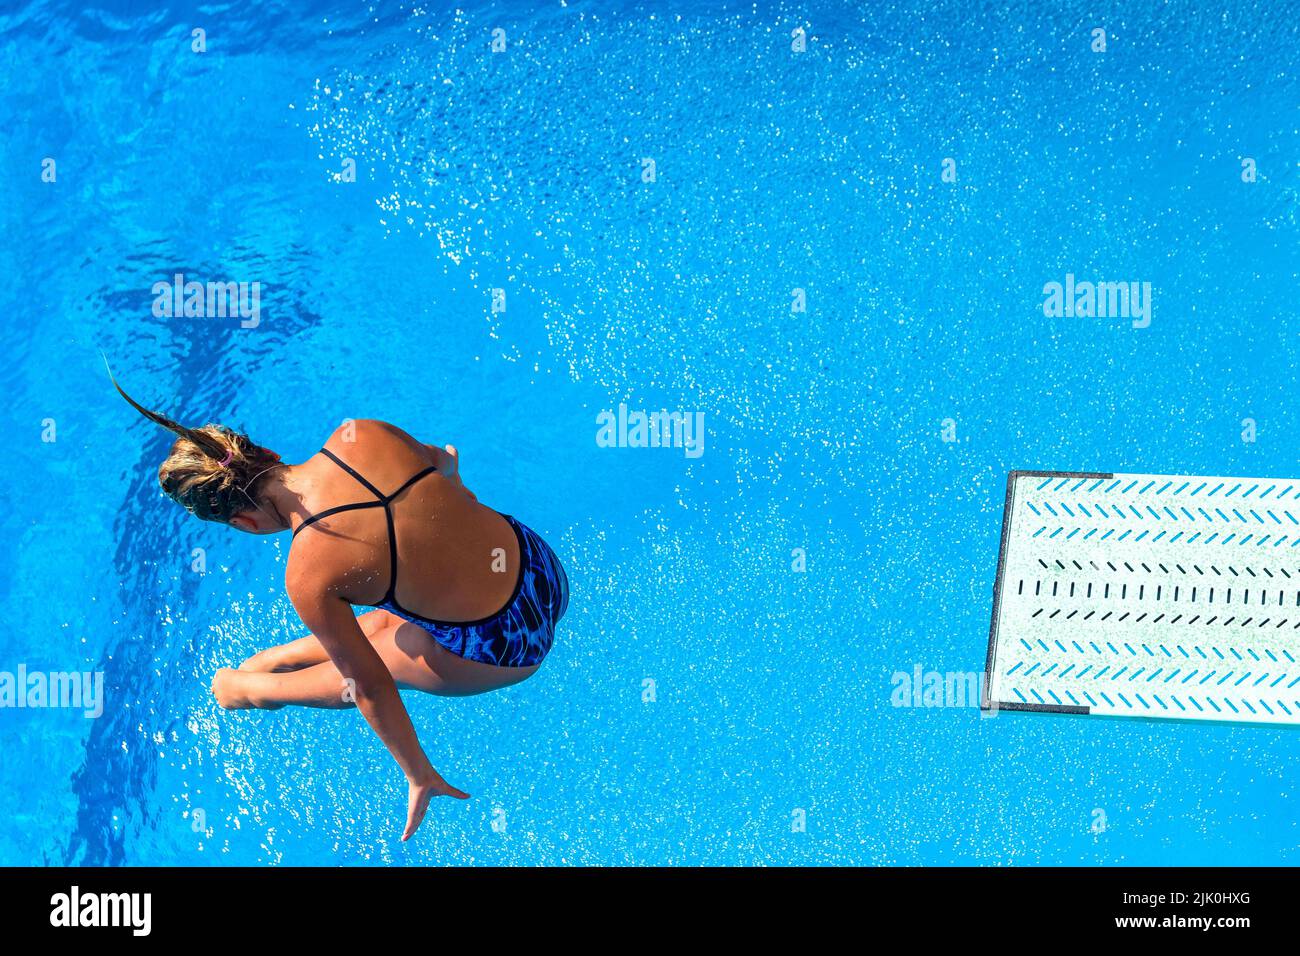 Aquatic pool diving girl  action water entry  overhead photo. Stock Photo